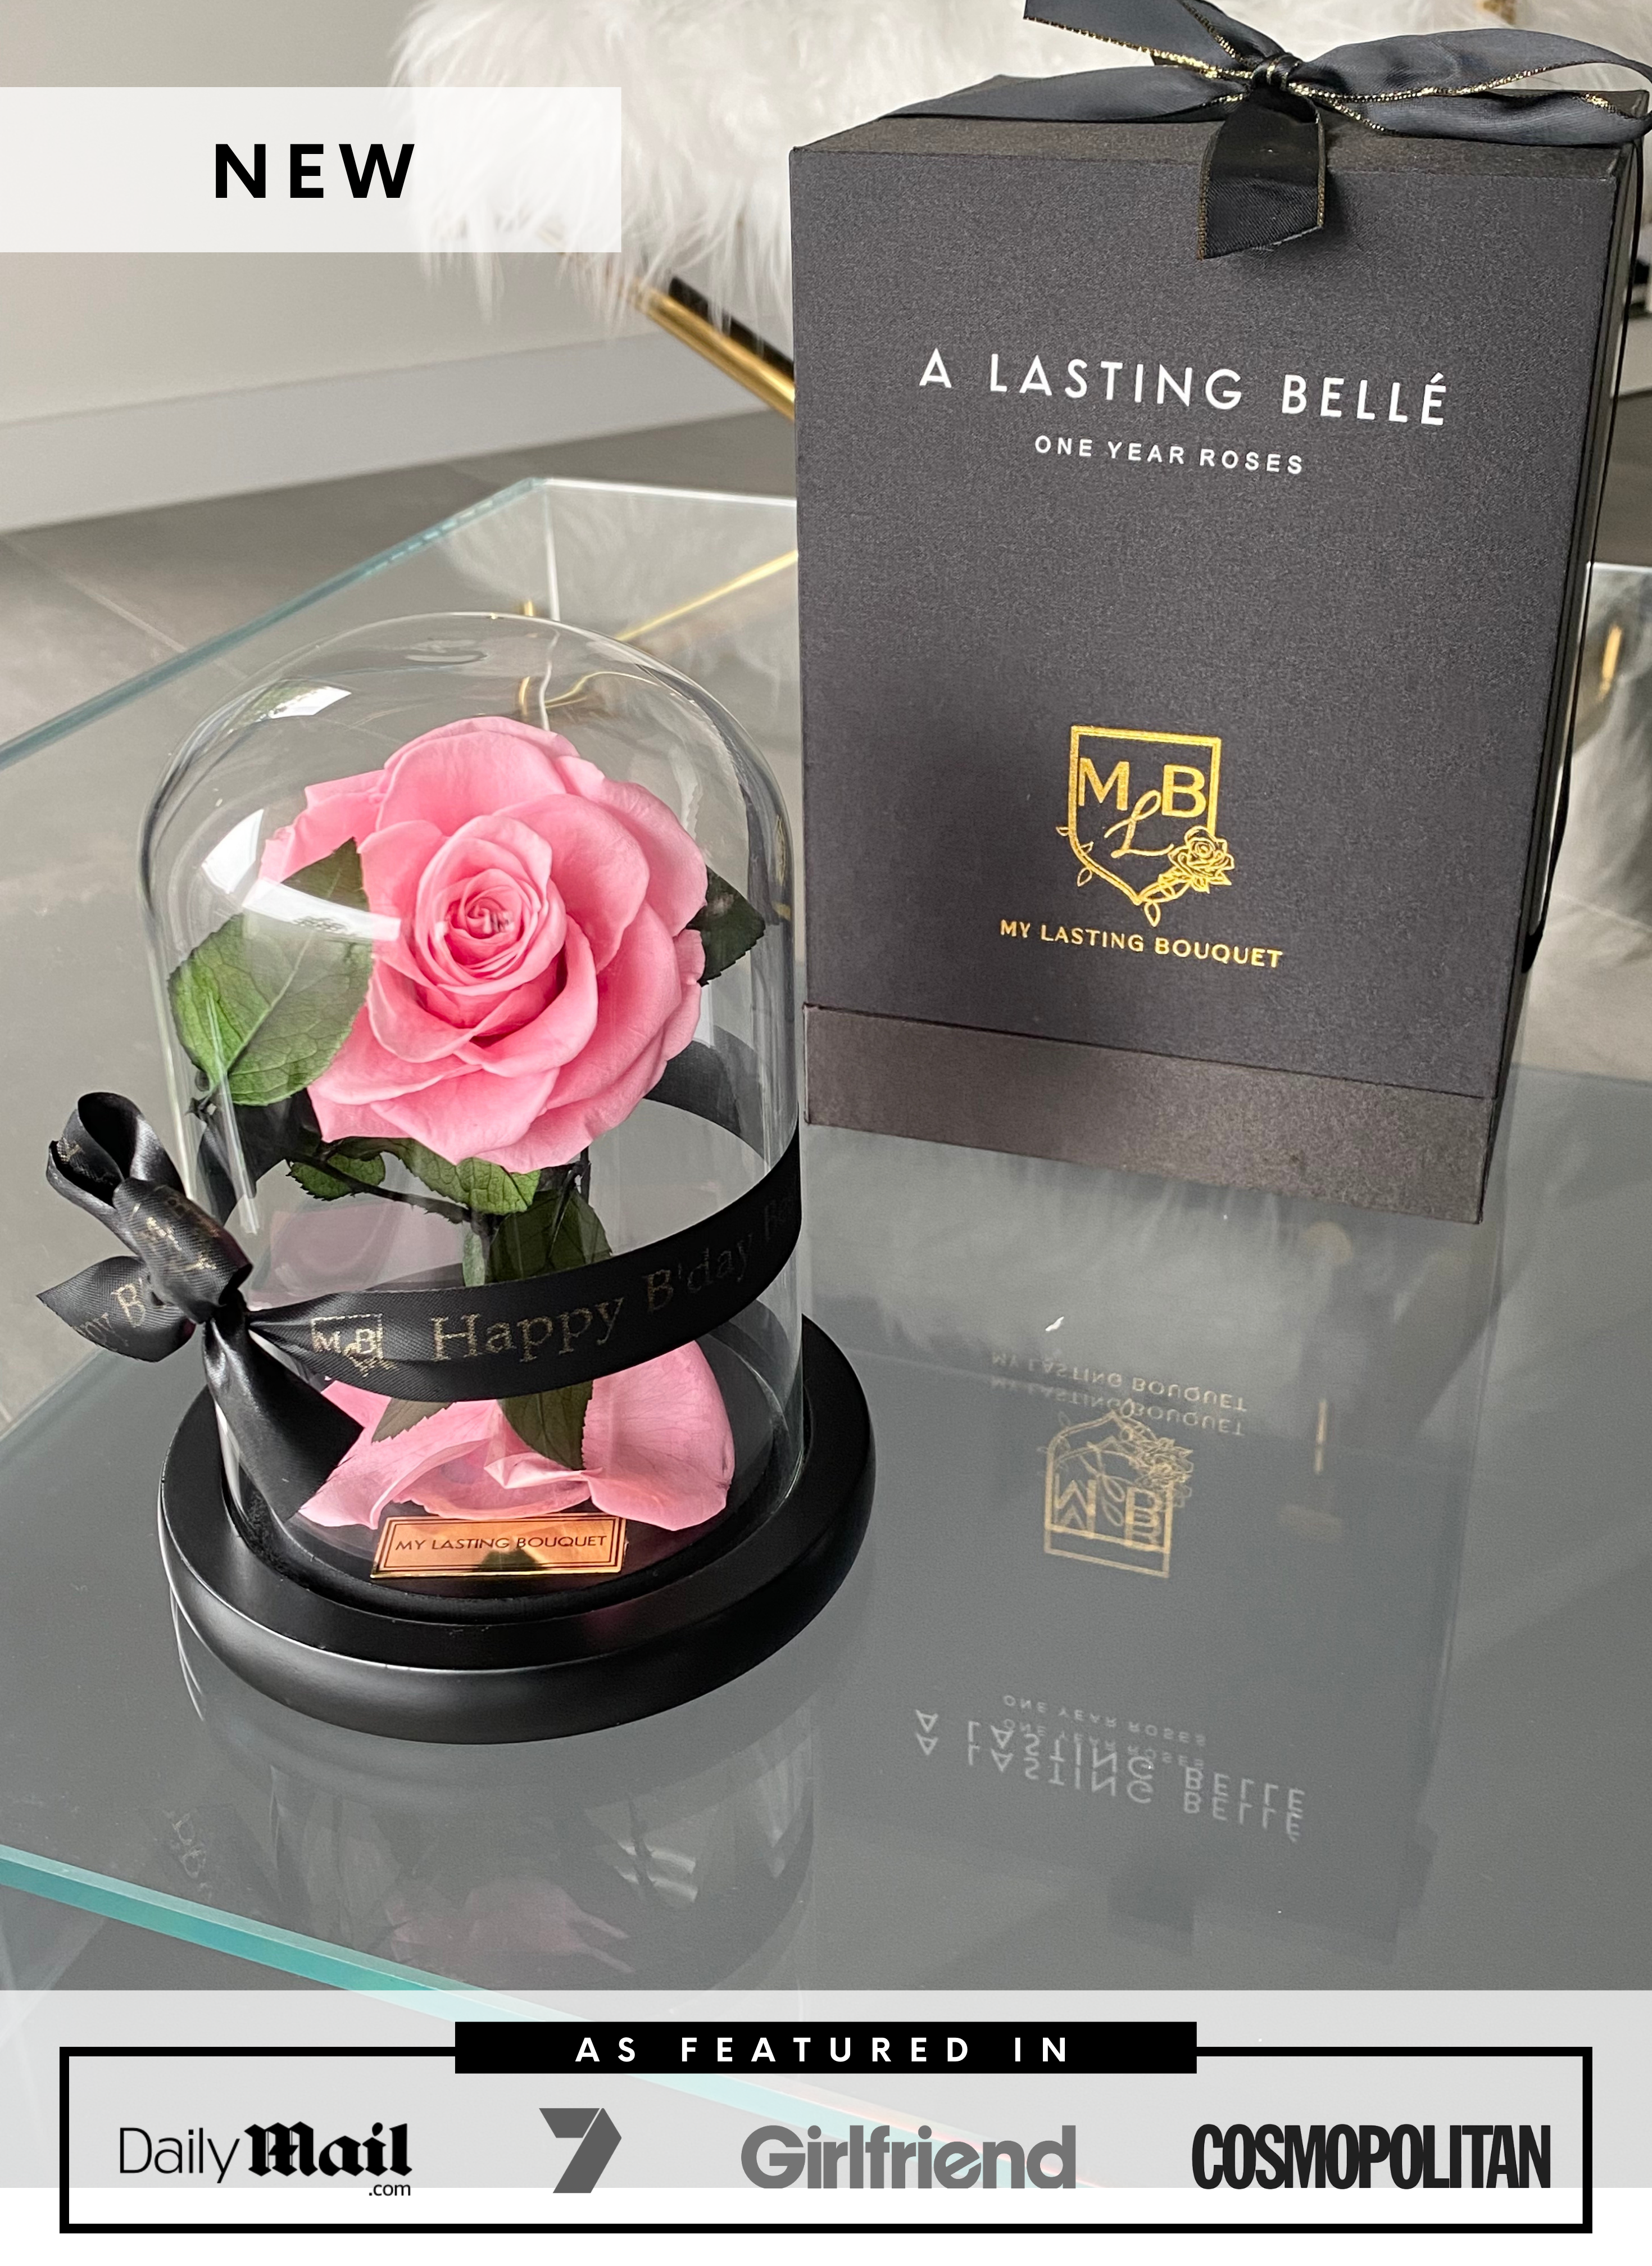 PINK Mini Rose Dome - My Lasting Bouquet